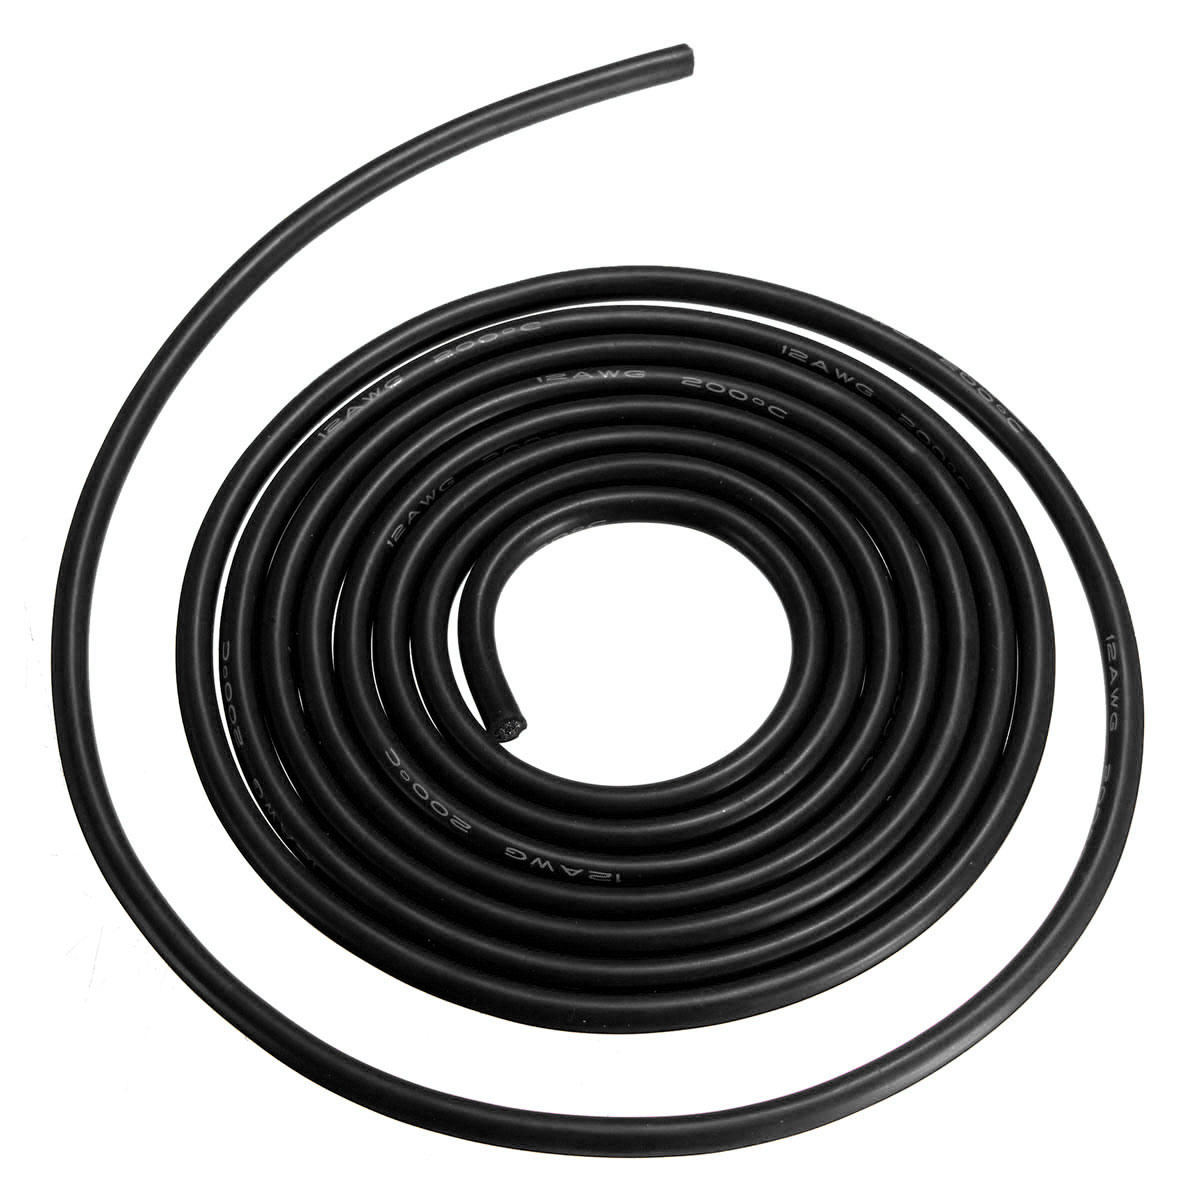 DANIU-2-Meter-Black-Silicone-Wire-Cable-10121416182022AWG-Flexible-Cable-1170287-6